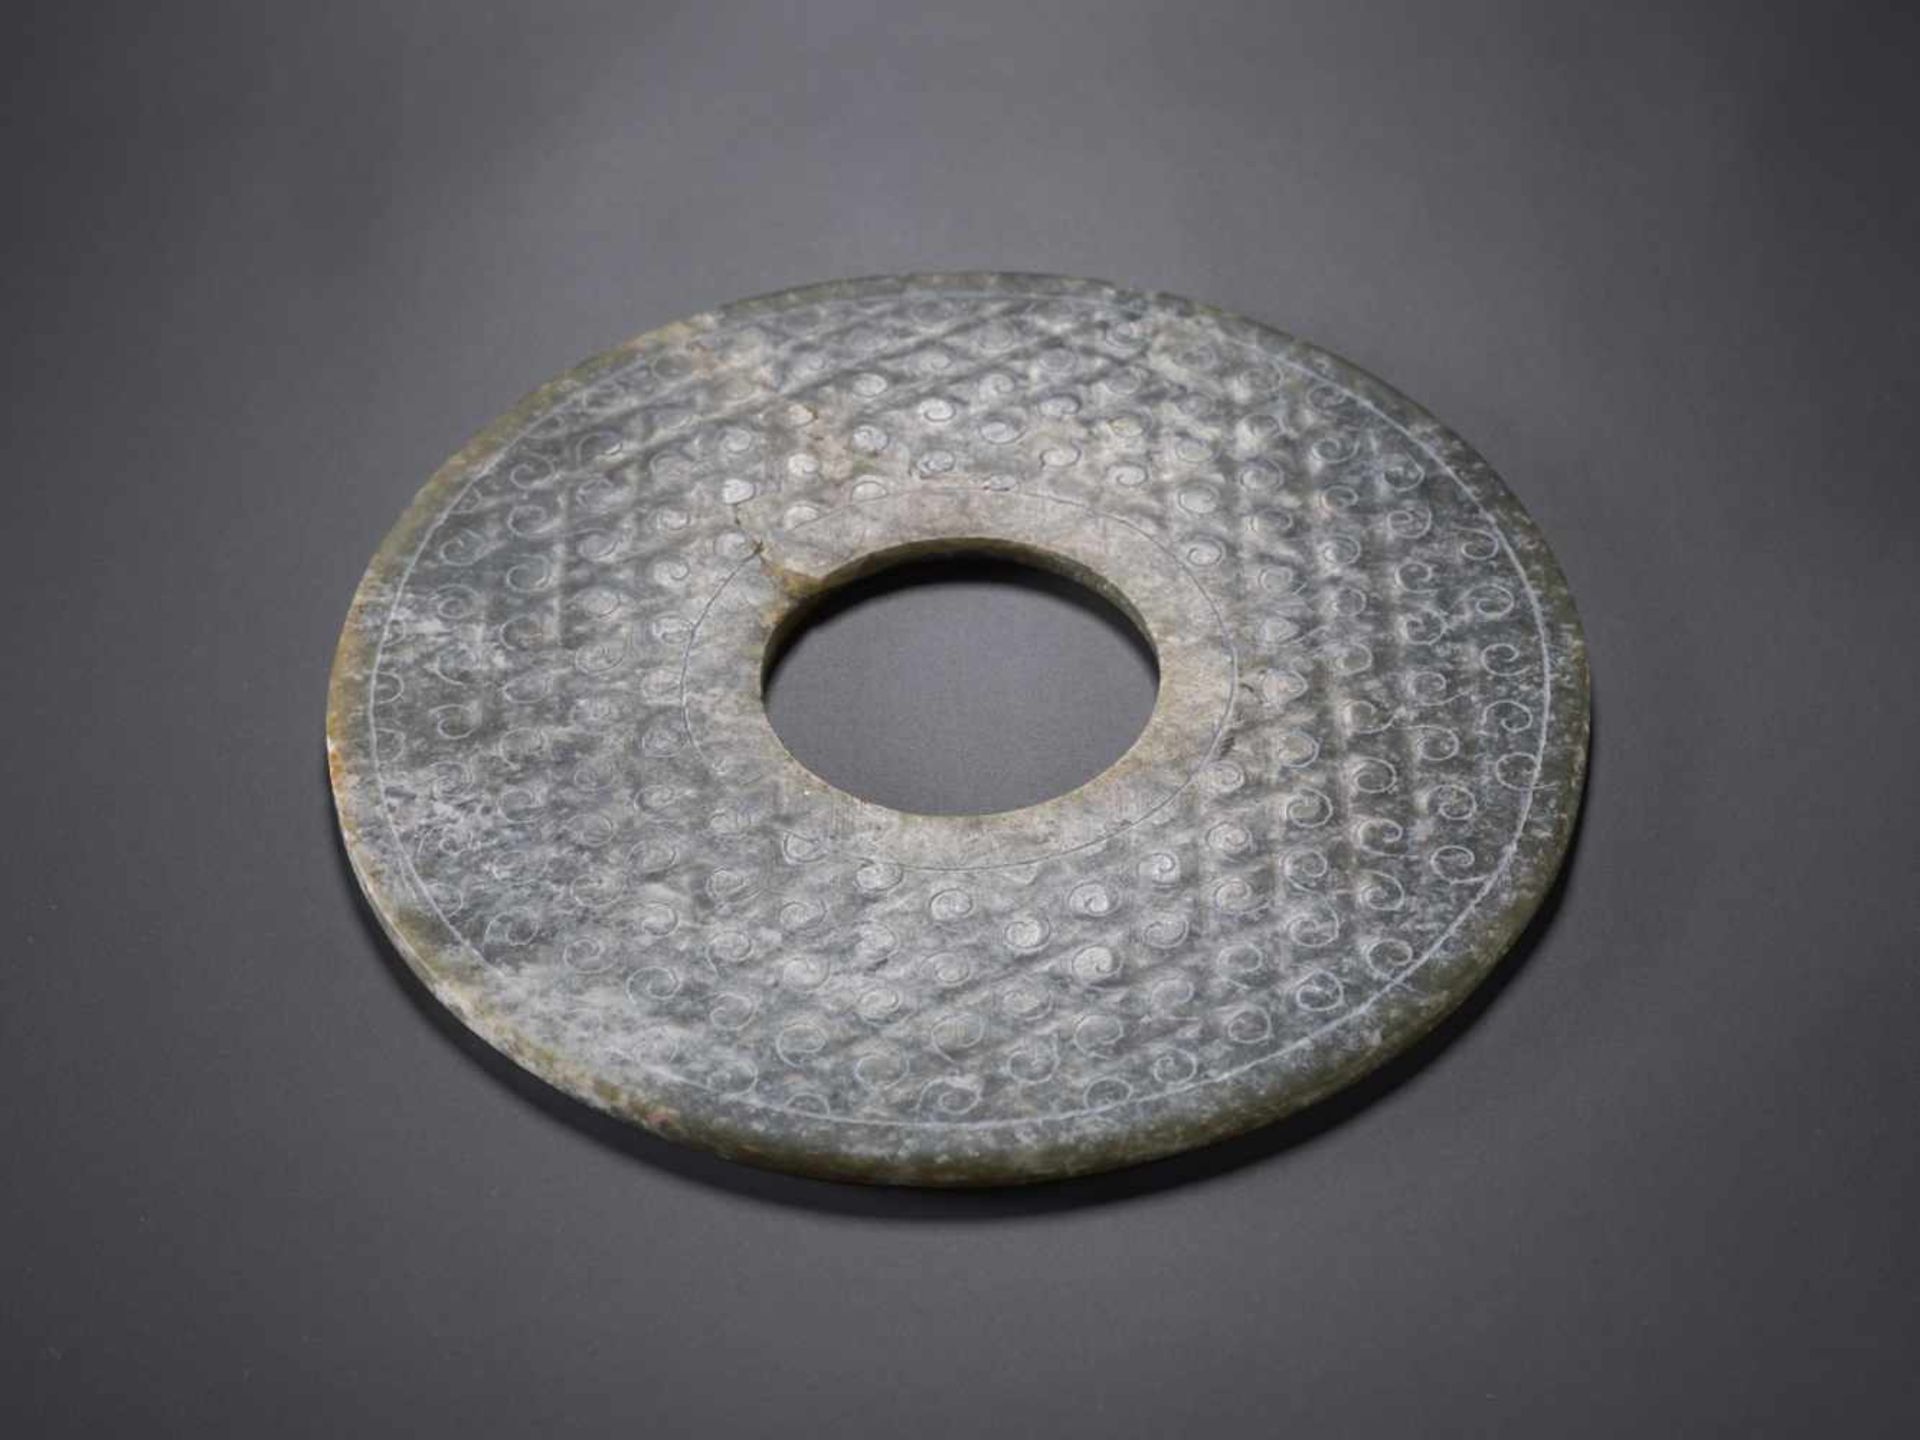 A REFINED CHARCOAL GREY DISC WITH ENGRAVED CURLS Jade. China, Han Dynasty, 2nd century BC 穀紋玉璧 - 漢代, - Bild 3 aus 8